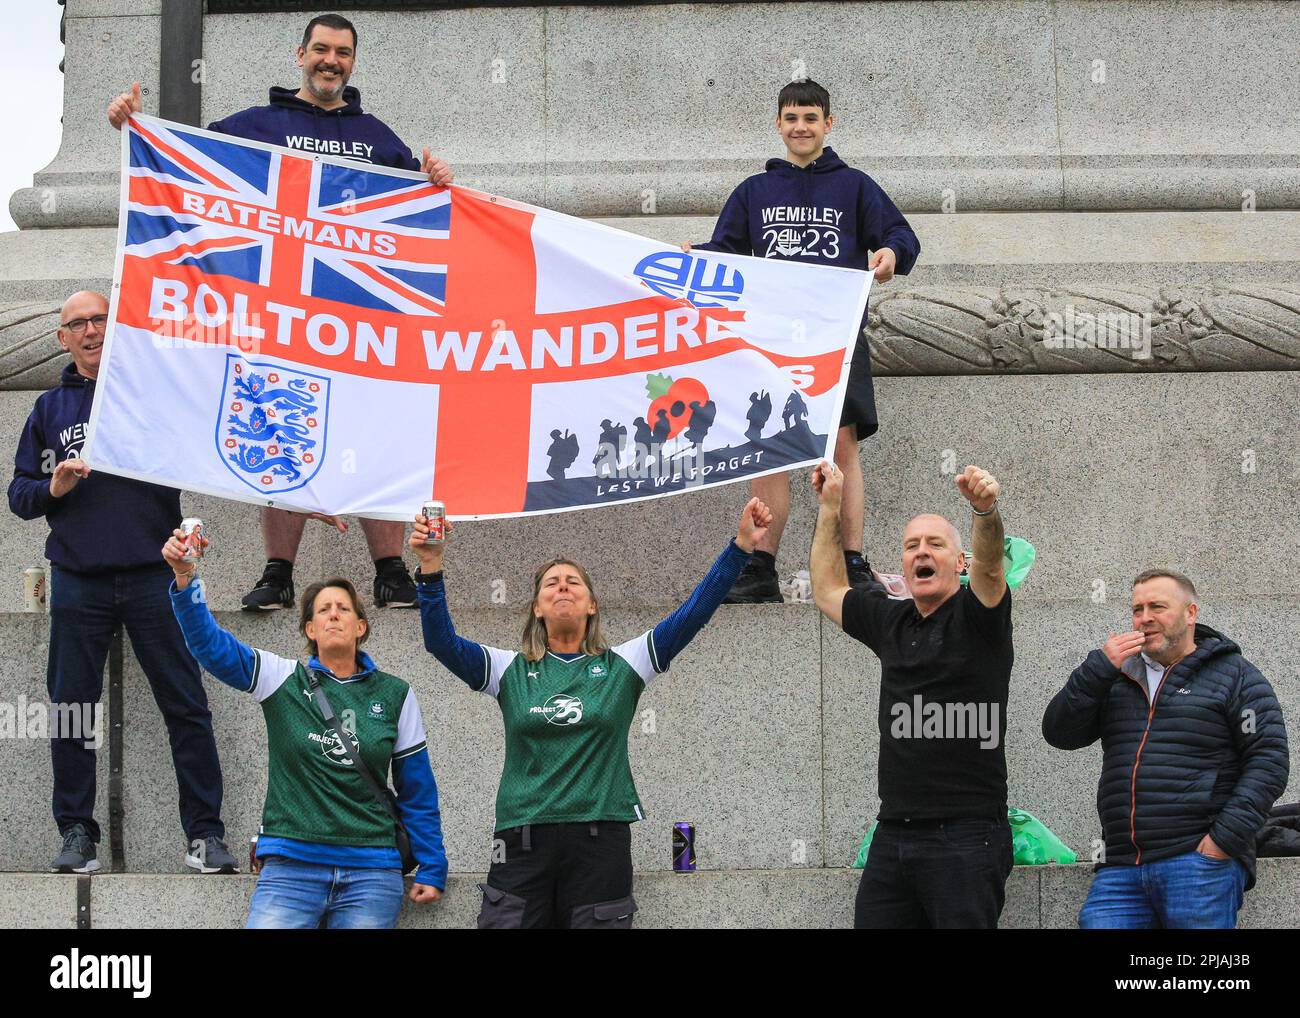 London, UK. 01st Apr, 2023. Bolton Wanderers fans, alongside some from Plymouth have come to Trafalgar Square ahead of the Bolton Wanderers v Plymouth Argyle EFL Trophy final (Carabao Cup) at Wembley tomorrow. The fans were having some friendly banter and celebrations ahead of the game. Credit: Imageplotter/Alamy Live News Stock Photo